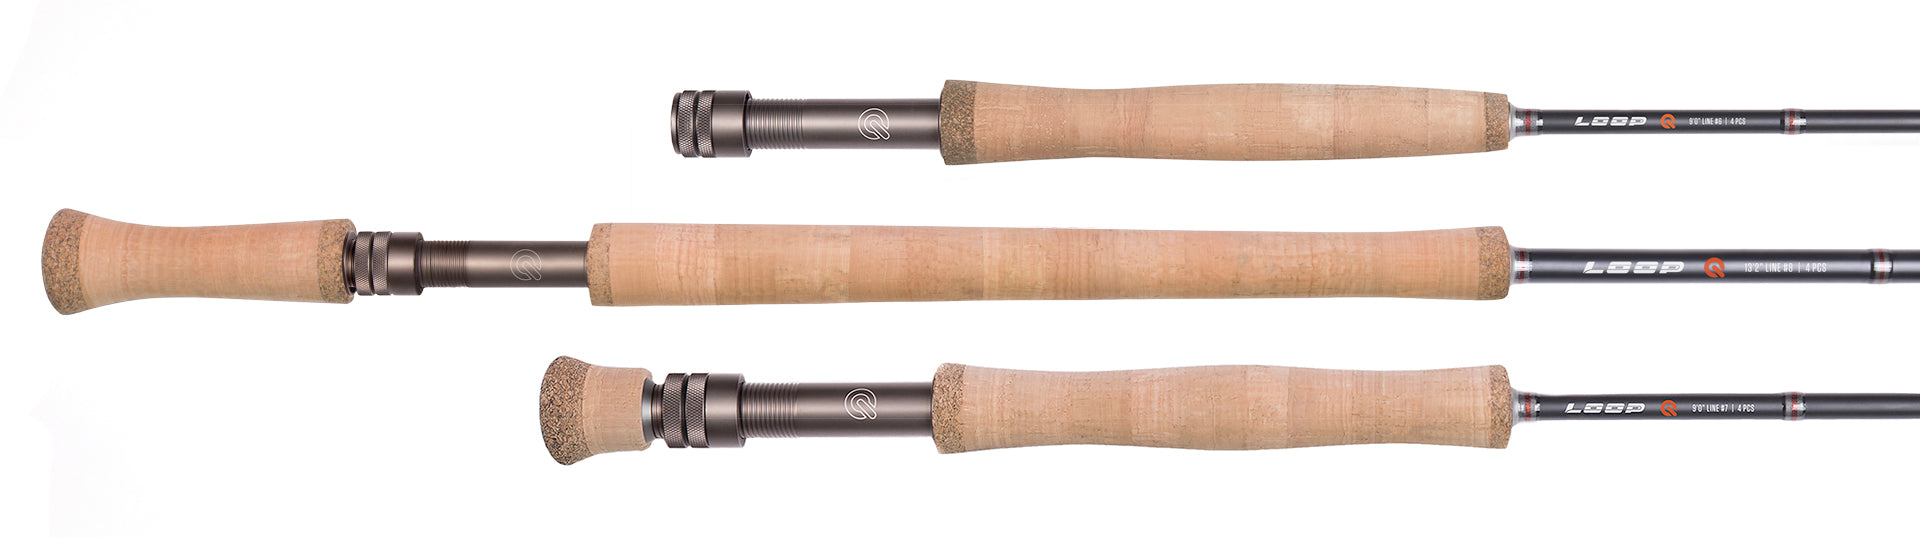 STRAITS FLY SHOPLoop QFly RodThe primary objective with the Q series was to  design a range of high performance fly rods that suit a range of angling  abilities. Available at a highly